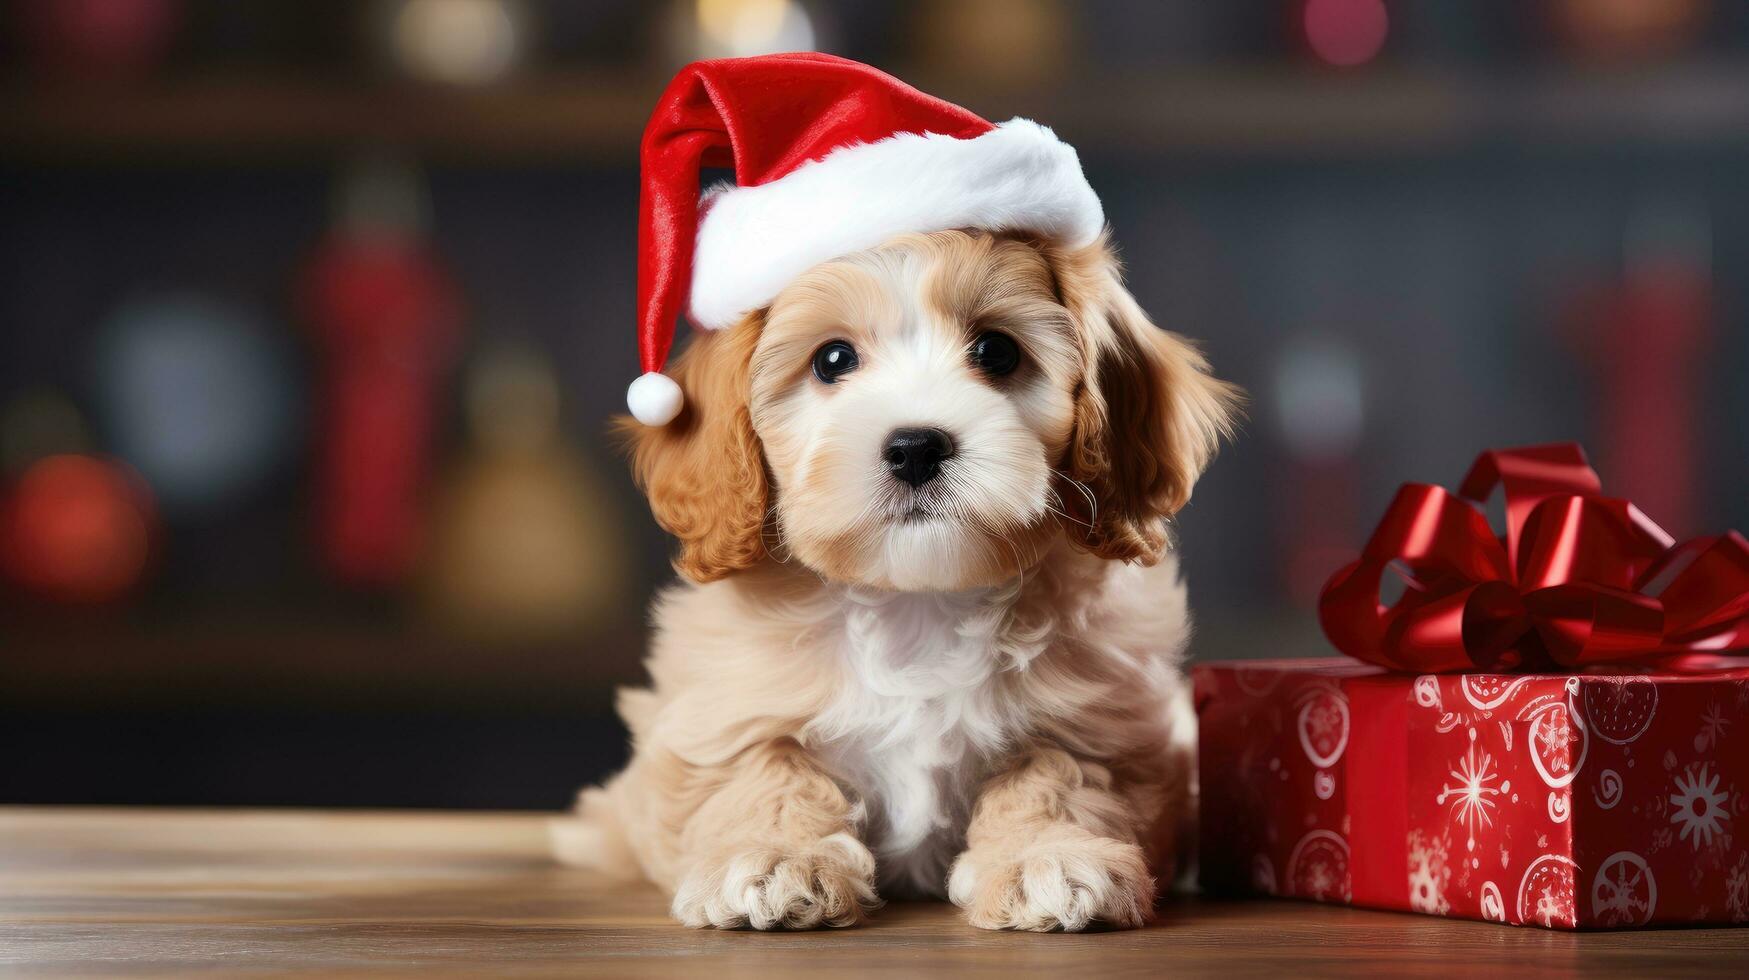 cute dog in santas hat with gift box photo